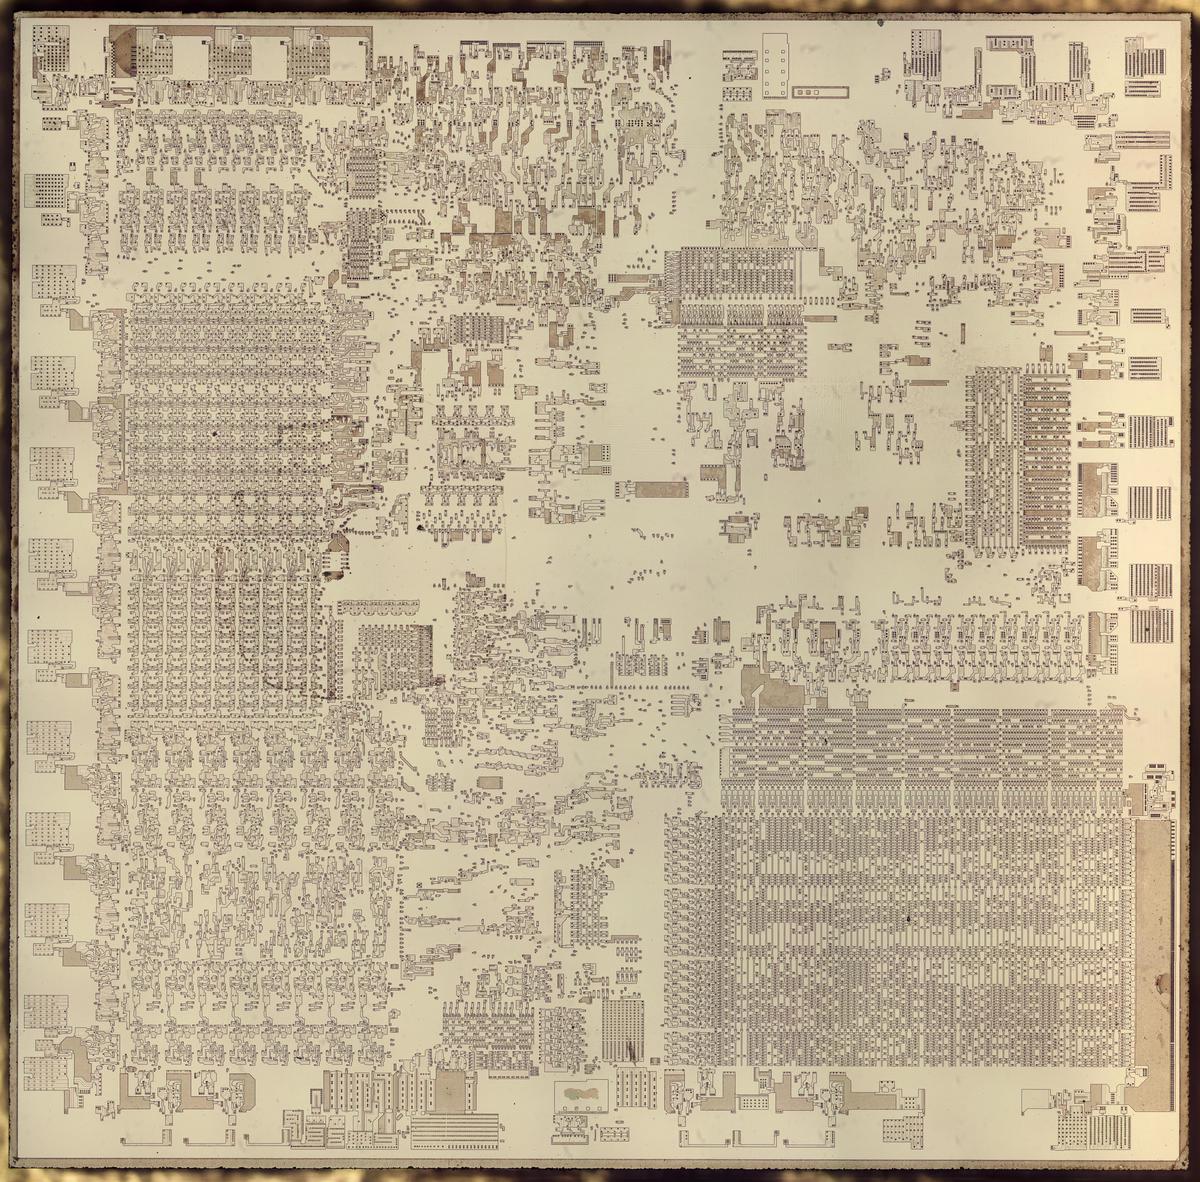 Die photo of the Intel 8086 processor. The metal and polysilicon have been removed to reveal the underlying silicon.